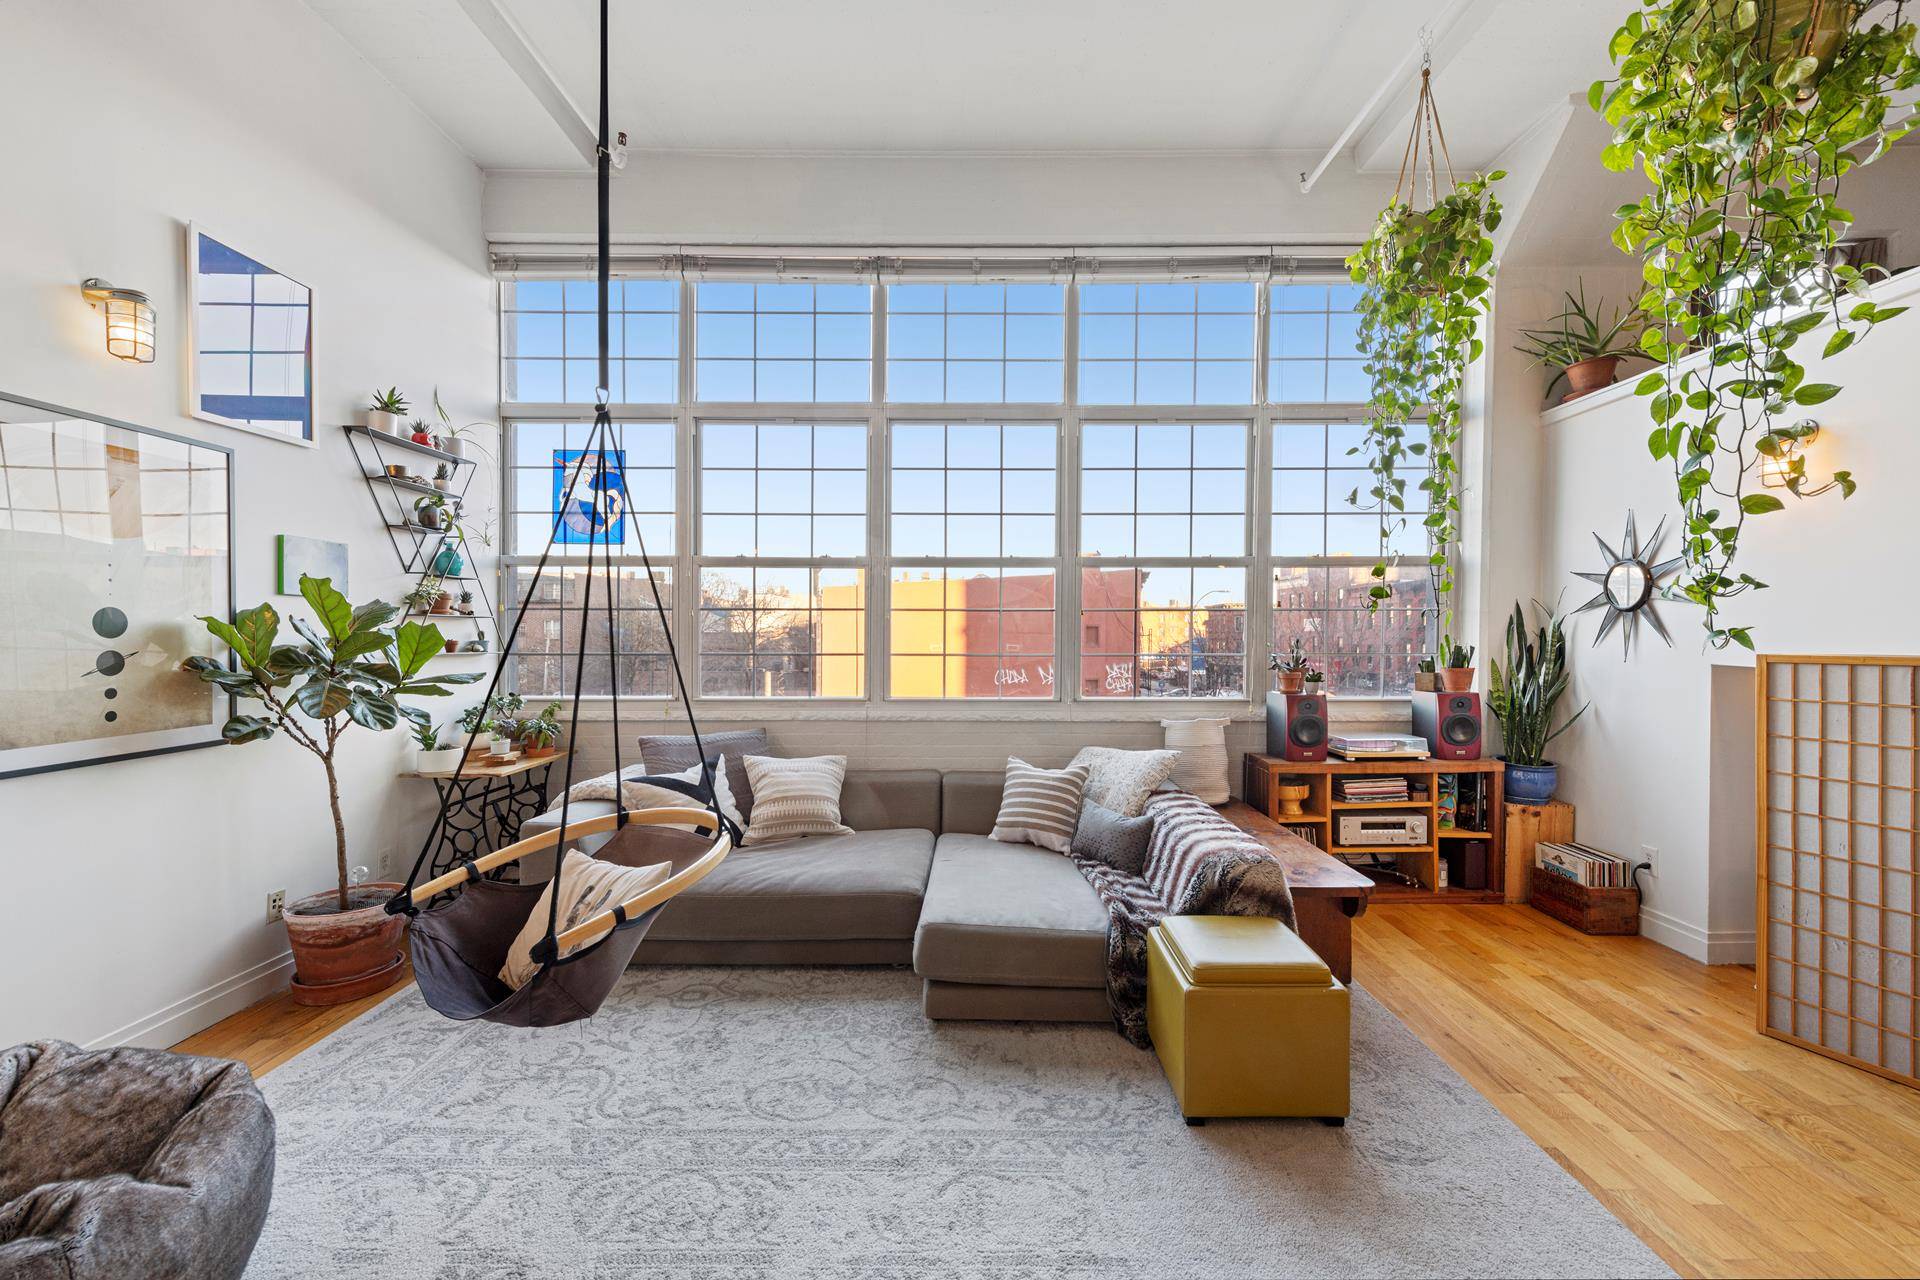 The Brooklyn loft you've been waiting for is now available in the Chocolate Factory building.